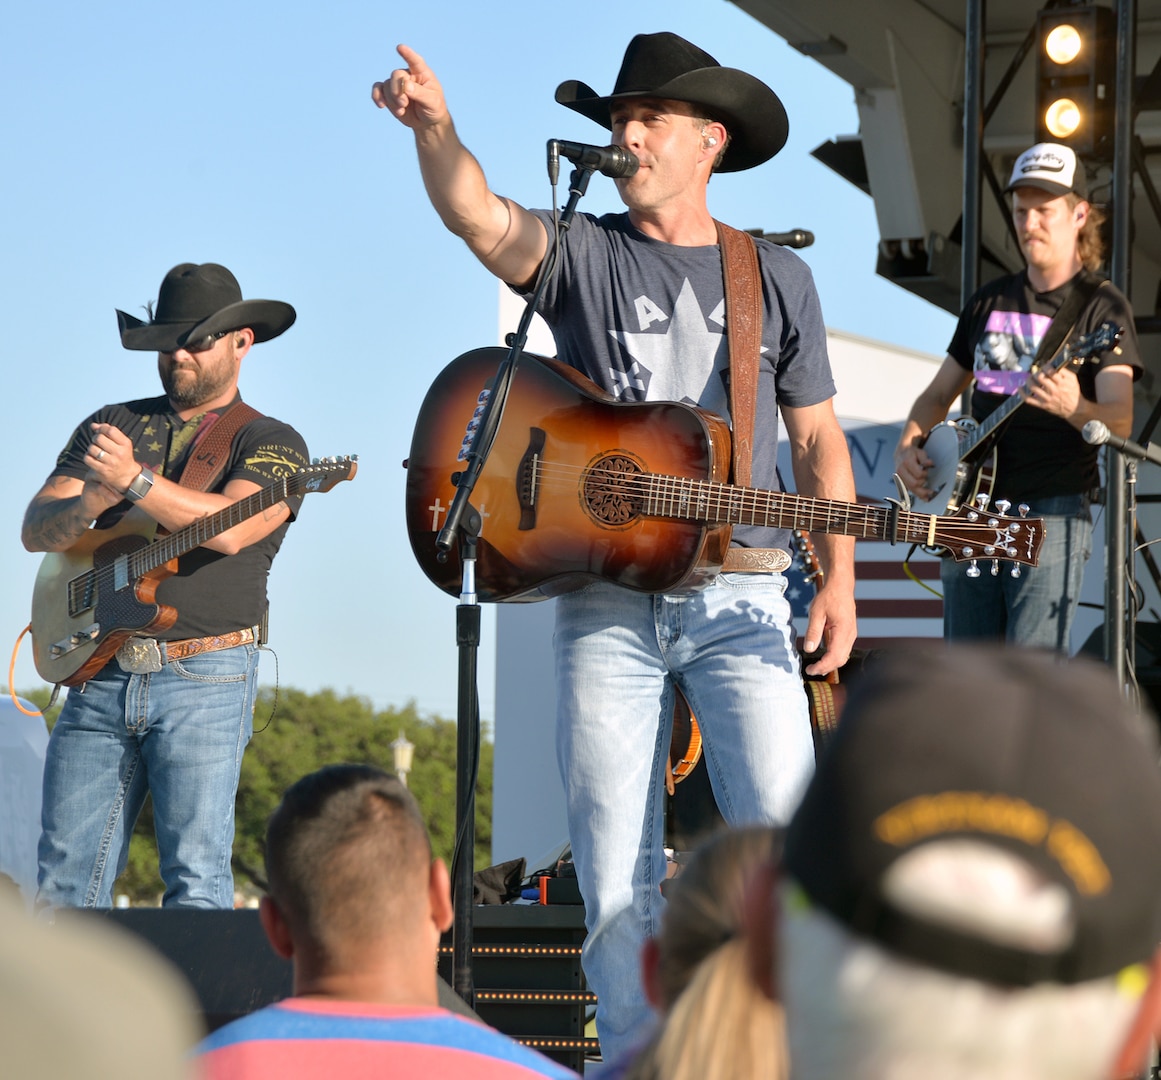 Country music star Aaron Watson entertains the crowd May 6 at Joint Base San Antonio-Fort Sam Houston during the Military Appreciation Weekend celebration May 5-6. Watson kept concertgoers engaged with stories about his family, the inspiration for his songs and his music career. Thousands of residents of San Antonio and surrounding communities took advantage of the great weather to enjoy live music, rides, arts and crafts, military demonstration teams, historic tours, a polo match, live music and fireworks.